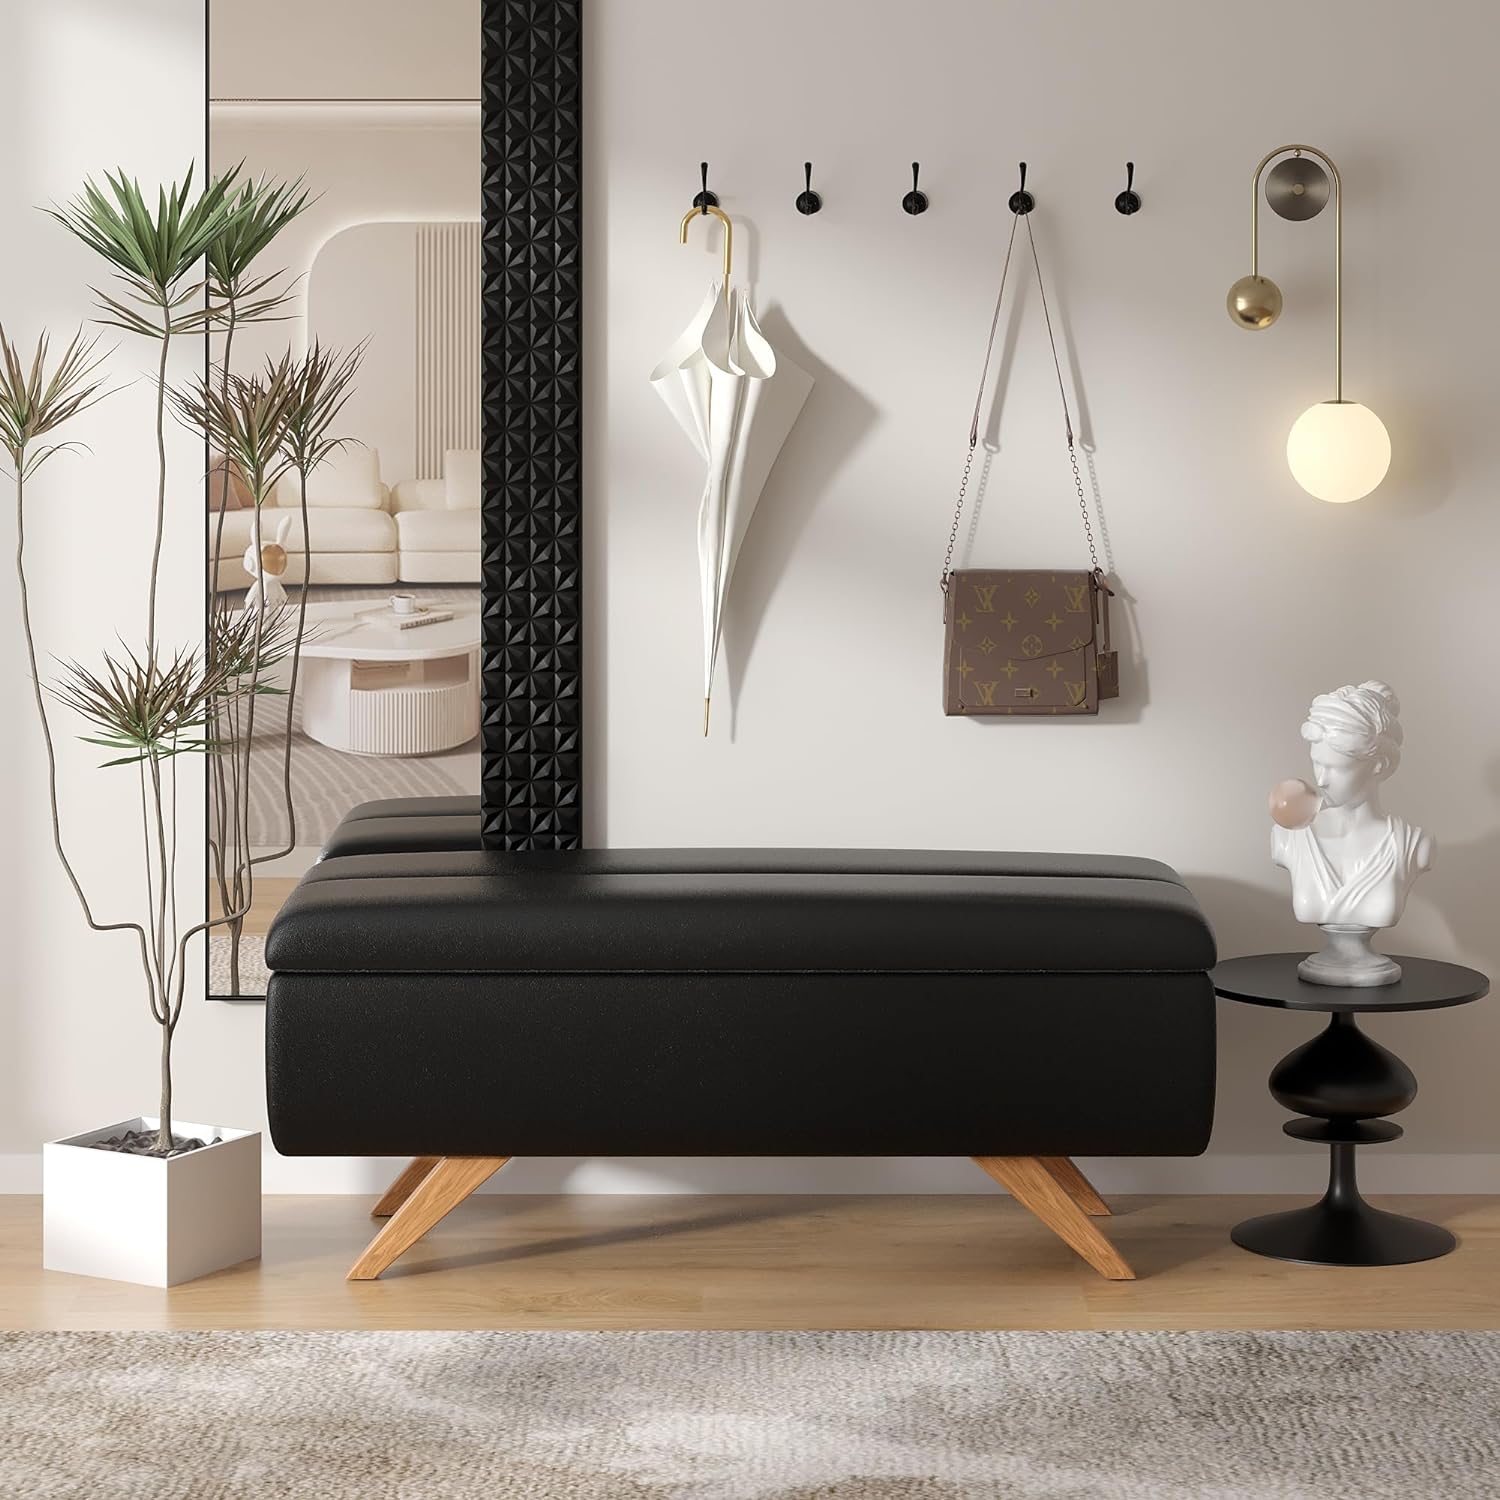 VECELO PU Leather Ottoman Bench with 6.1-inch Storage Space